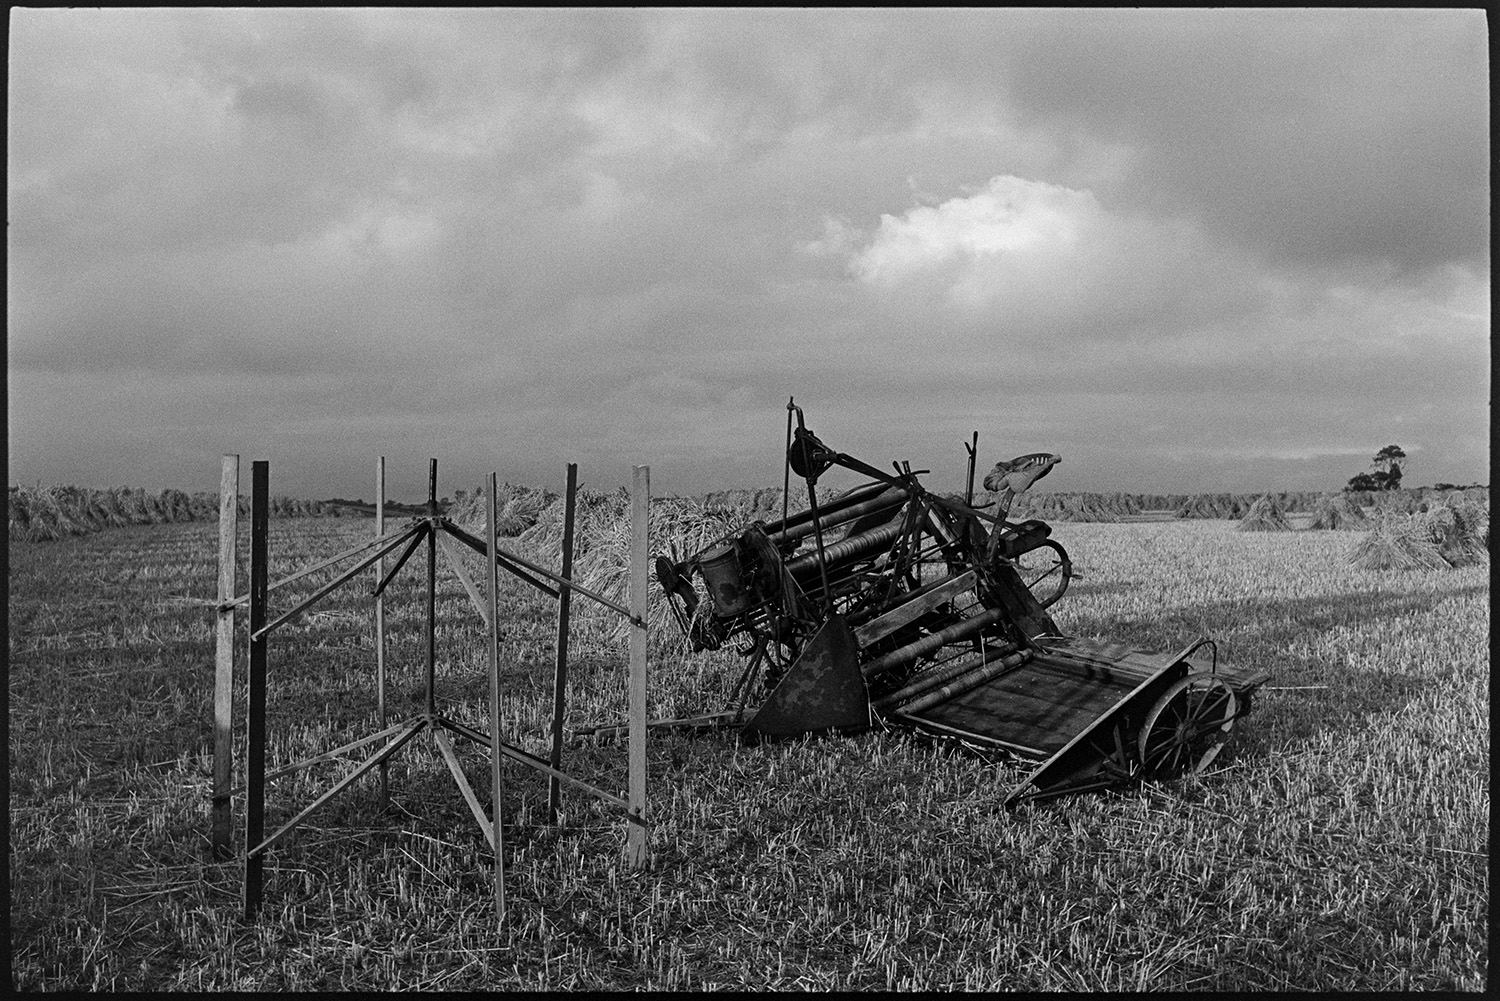 Men setting up stooks, reap and binder parked in field.
[A reap and binder machine in a field with corn stooks at Spittle, Chulmleigh.]